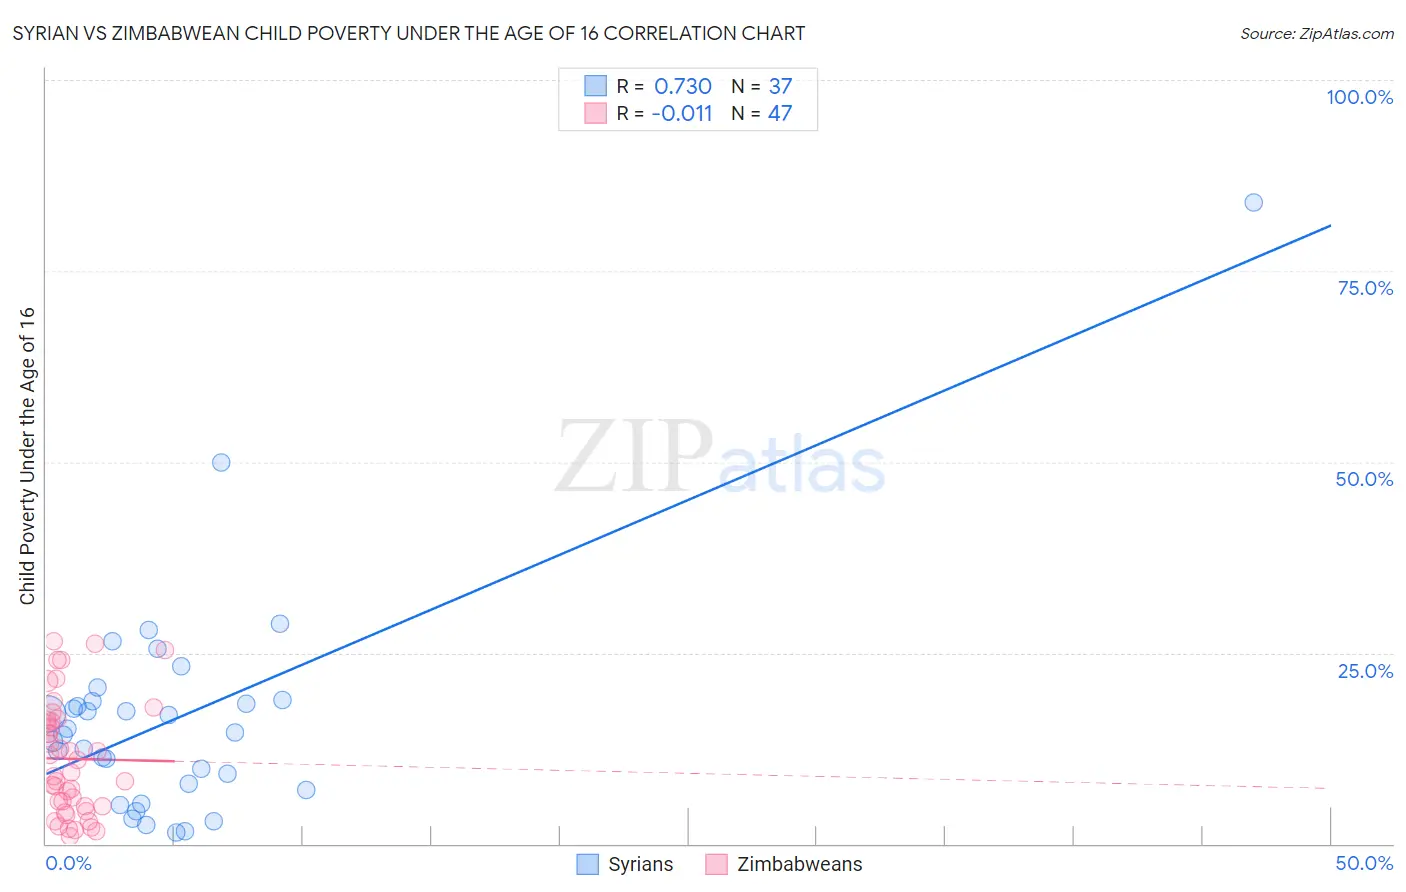 Syrian vs Zimbabwean Child Poverty Under the Age of 16